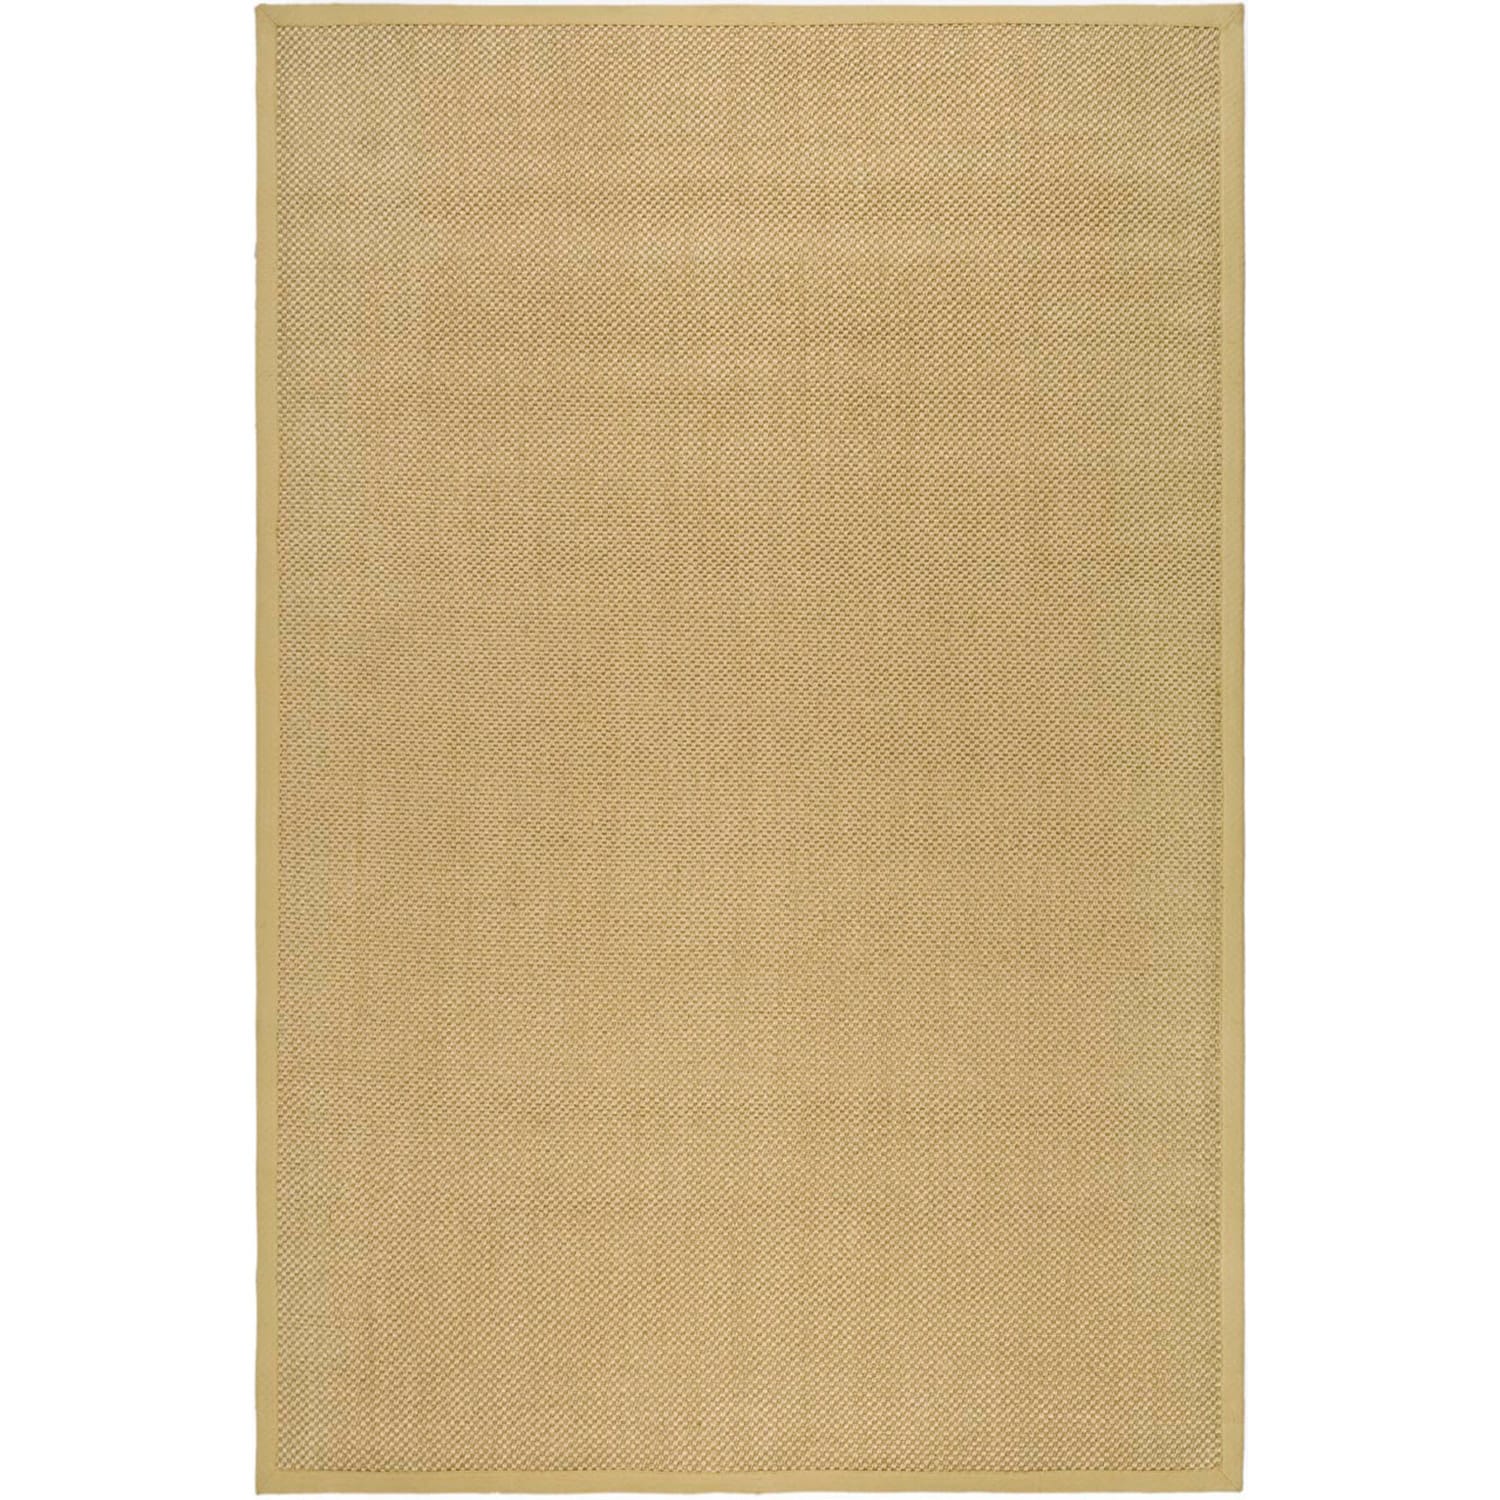 Hand woven Resorts Natural/ Beige Fine Sisal Rug (2 6 x 4) Today $